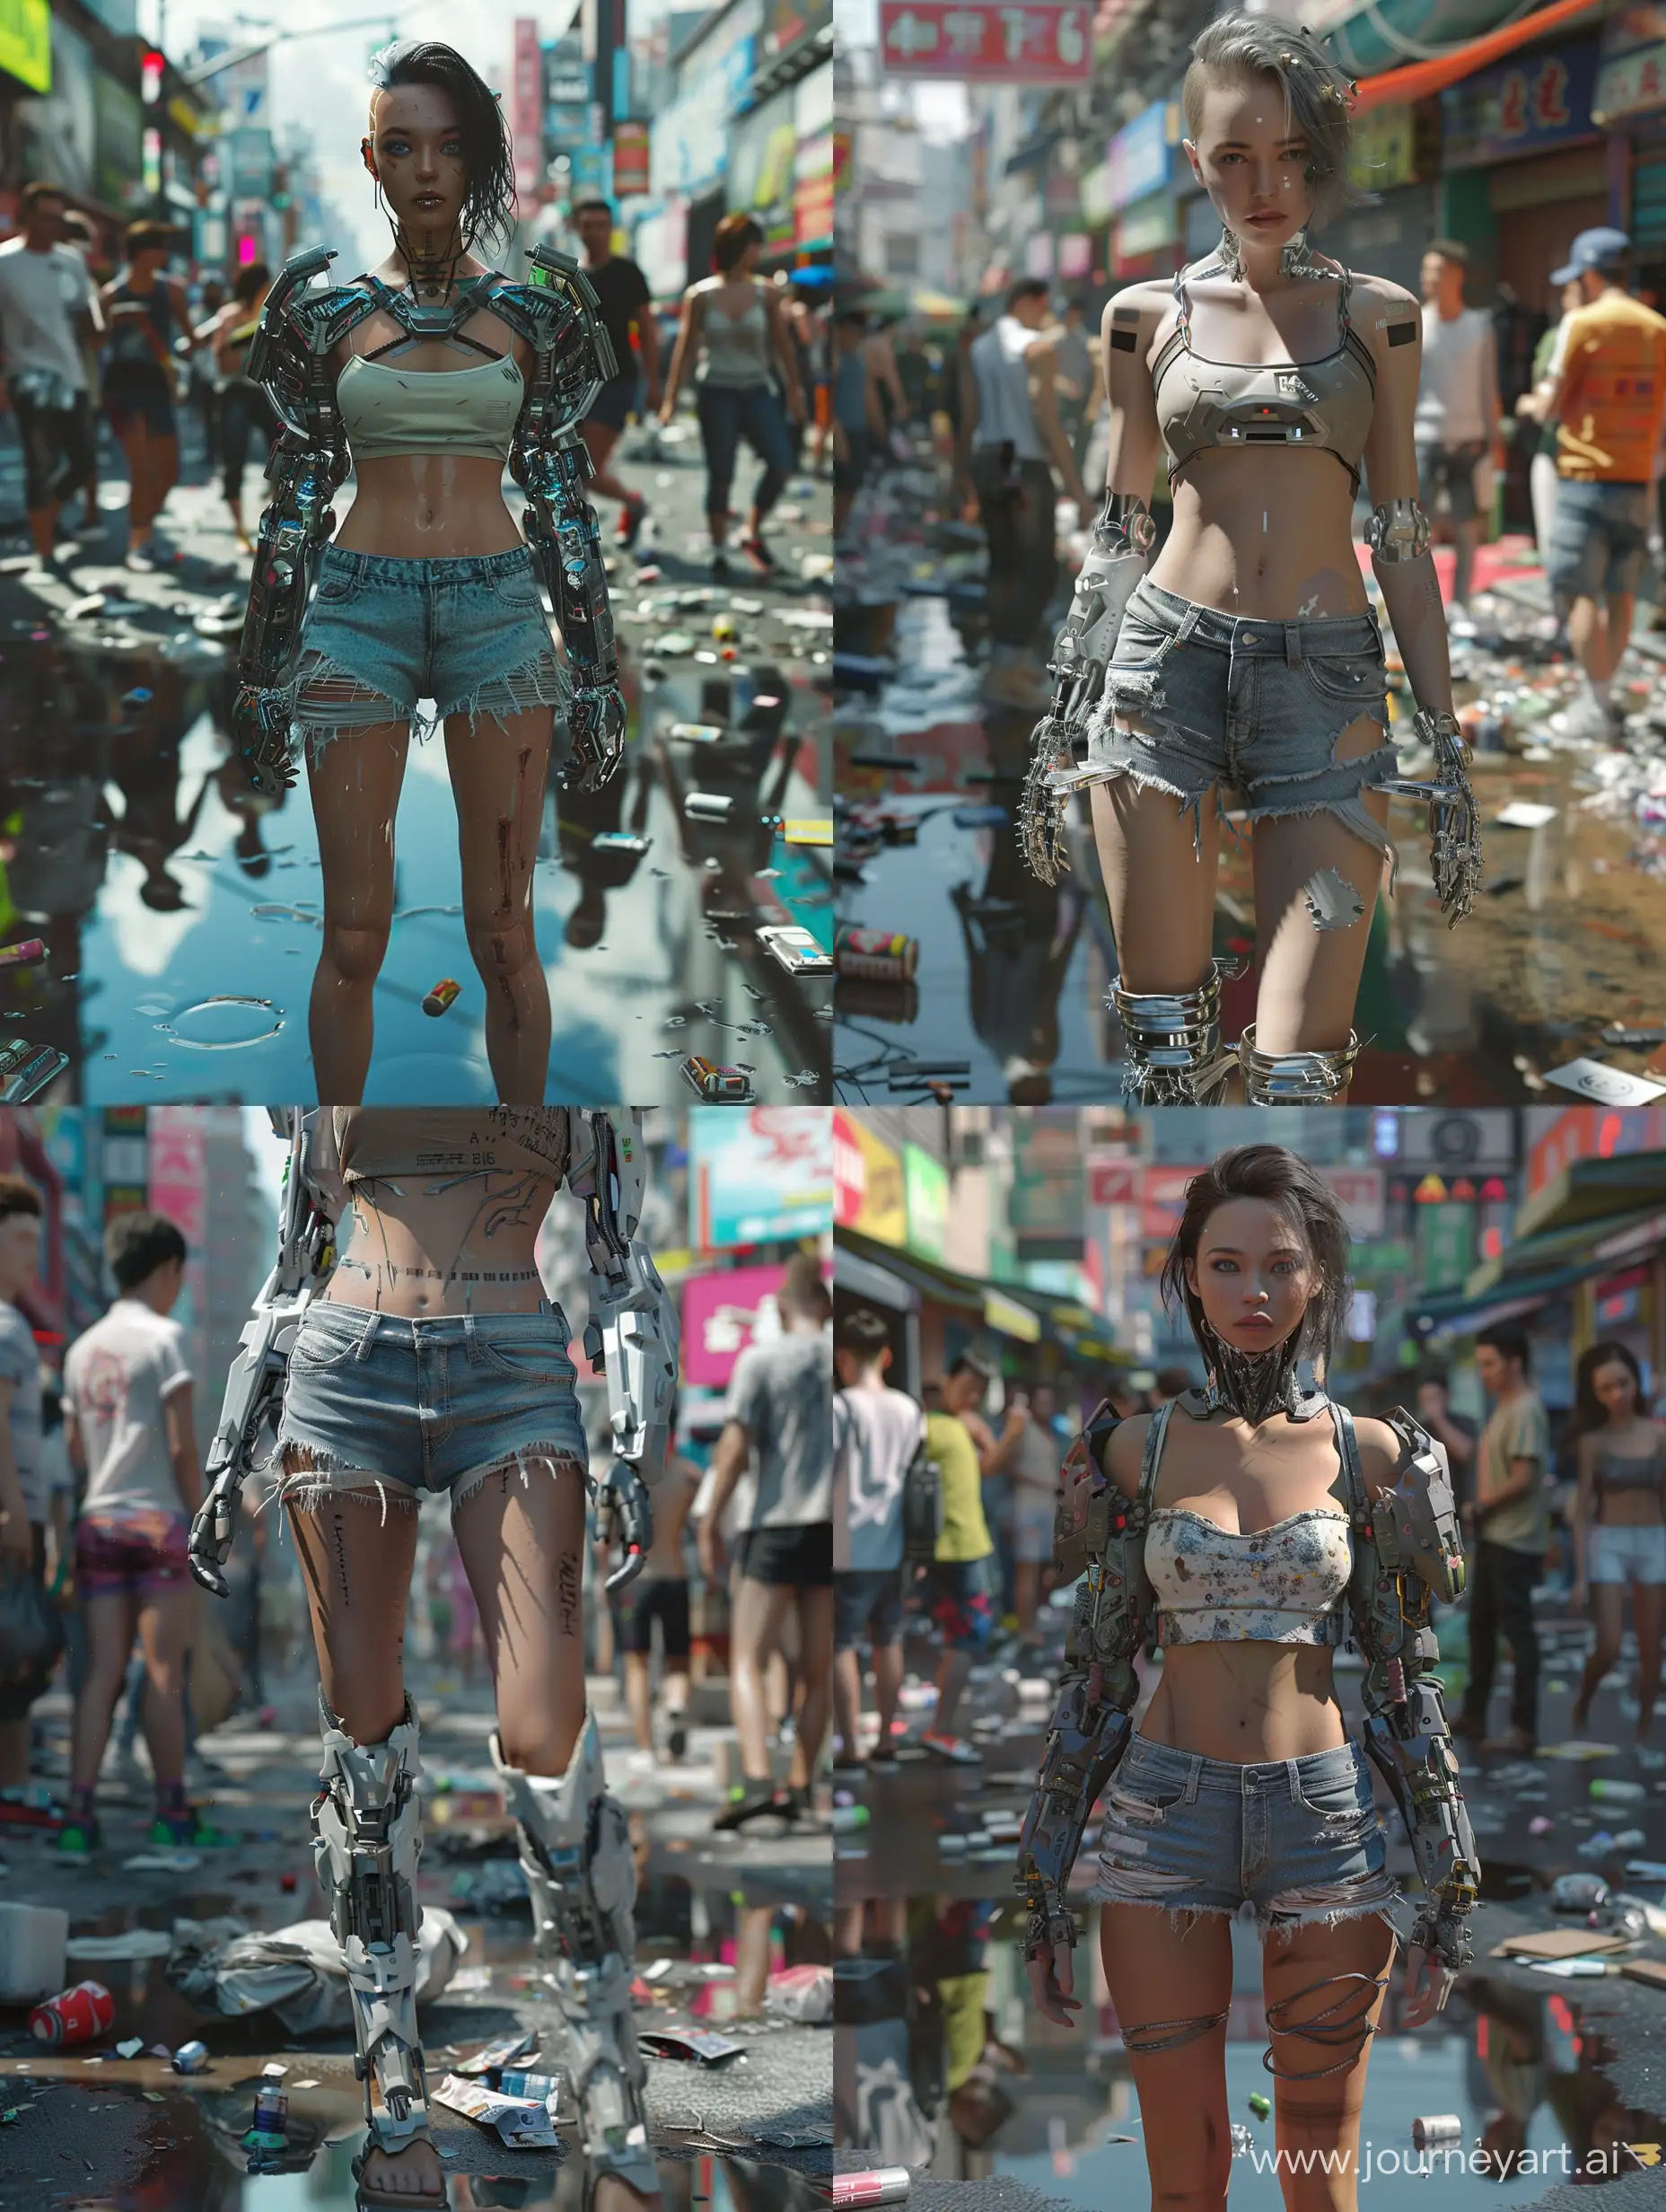 a mid journey V6 super high quality,high definition, high resolution, high detail cinematic close up dynamic scene where a strange advanced nanotechnological cyberpunk female wearing a crop top and short ripped jeans  stands amidst a vibrant contemporary city street with a background of disarrayed people around ,The cyberpunk female is adorned with intricate detailing, seamlessly integrating advanced technological enhancements on the armour. Volumetric lighting casts dramatic shadows, enhancing the ultra-realistic cinematography and creating a contrast between the female and the environment. The scene is full of details, such as small puddles of water, litter , and other oddities as well as reflections, The scene is rendered in a realistic style, with high definition, high resolution, and high detail.